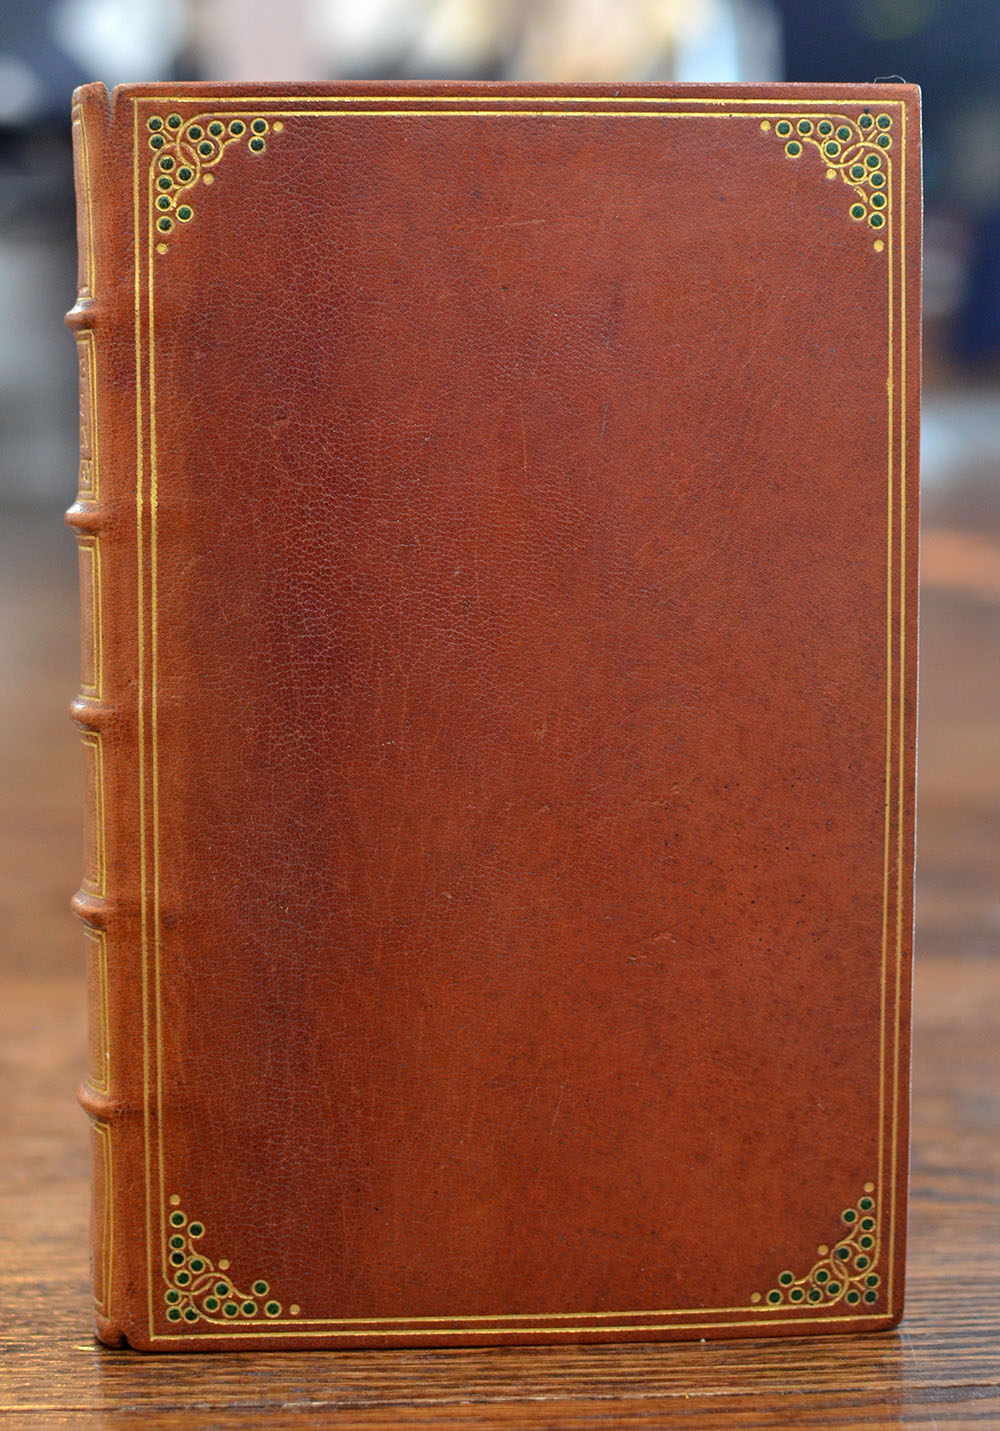 [Fine Binding | Edith J. Gedye] The Oxford Book of French Verse